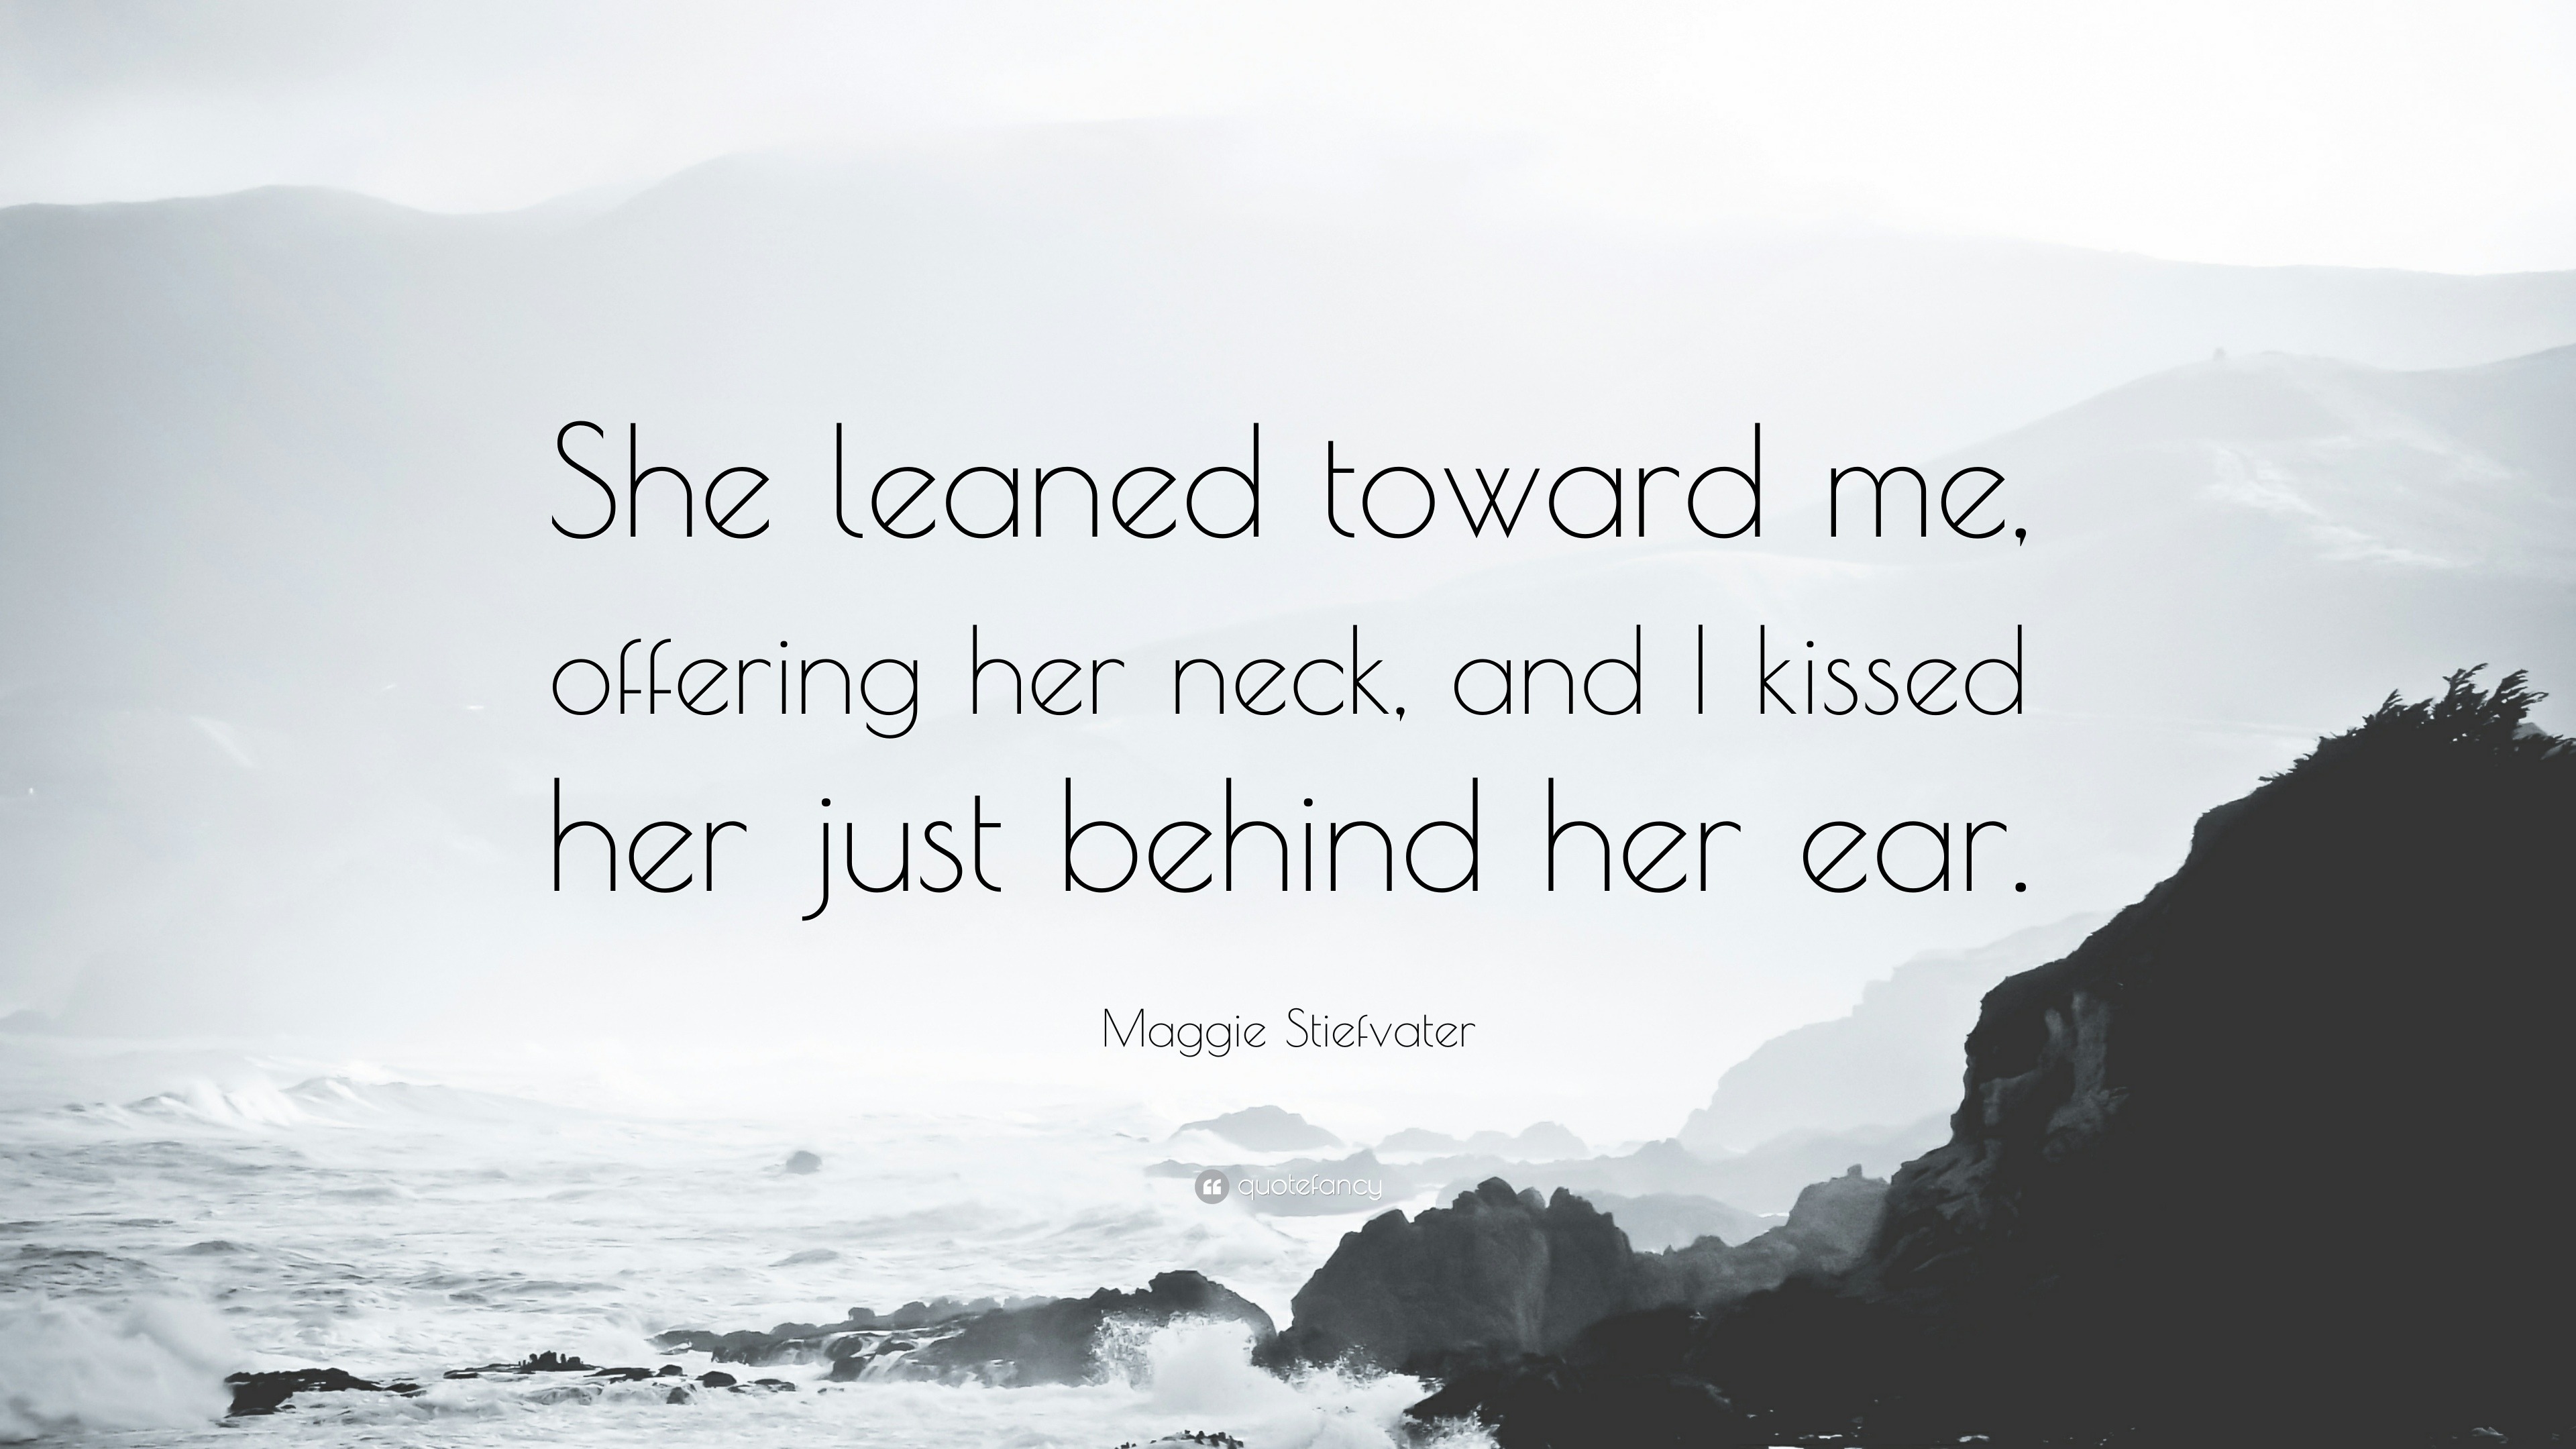 Maggie Stiefvater Quote: “She leaned toward me, offering her neck, and ...